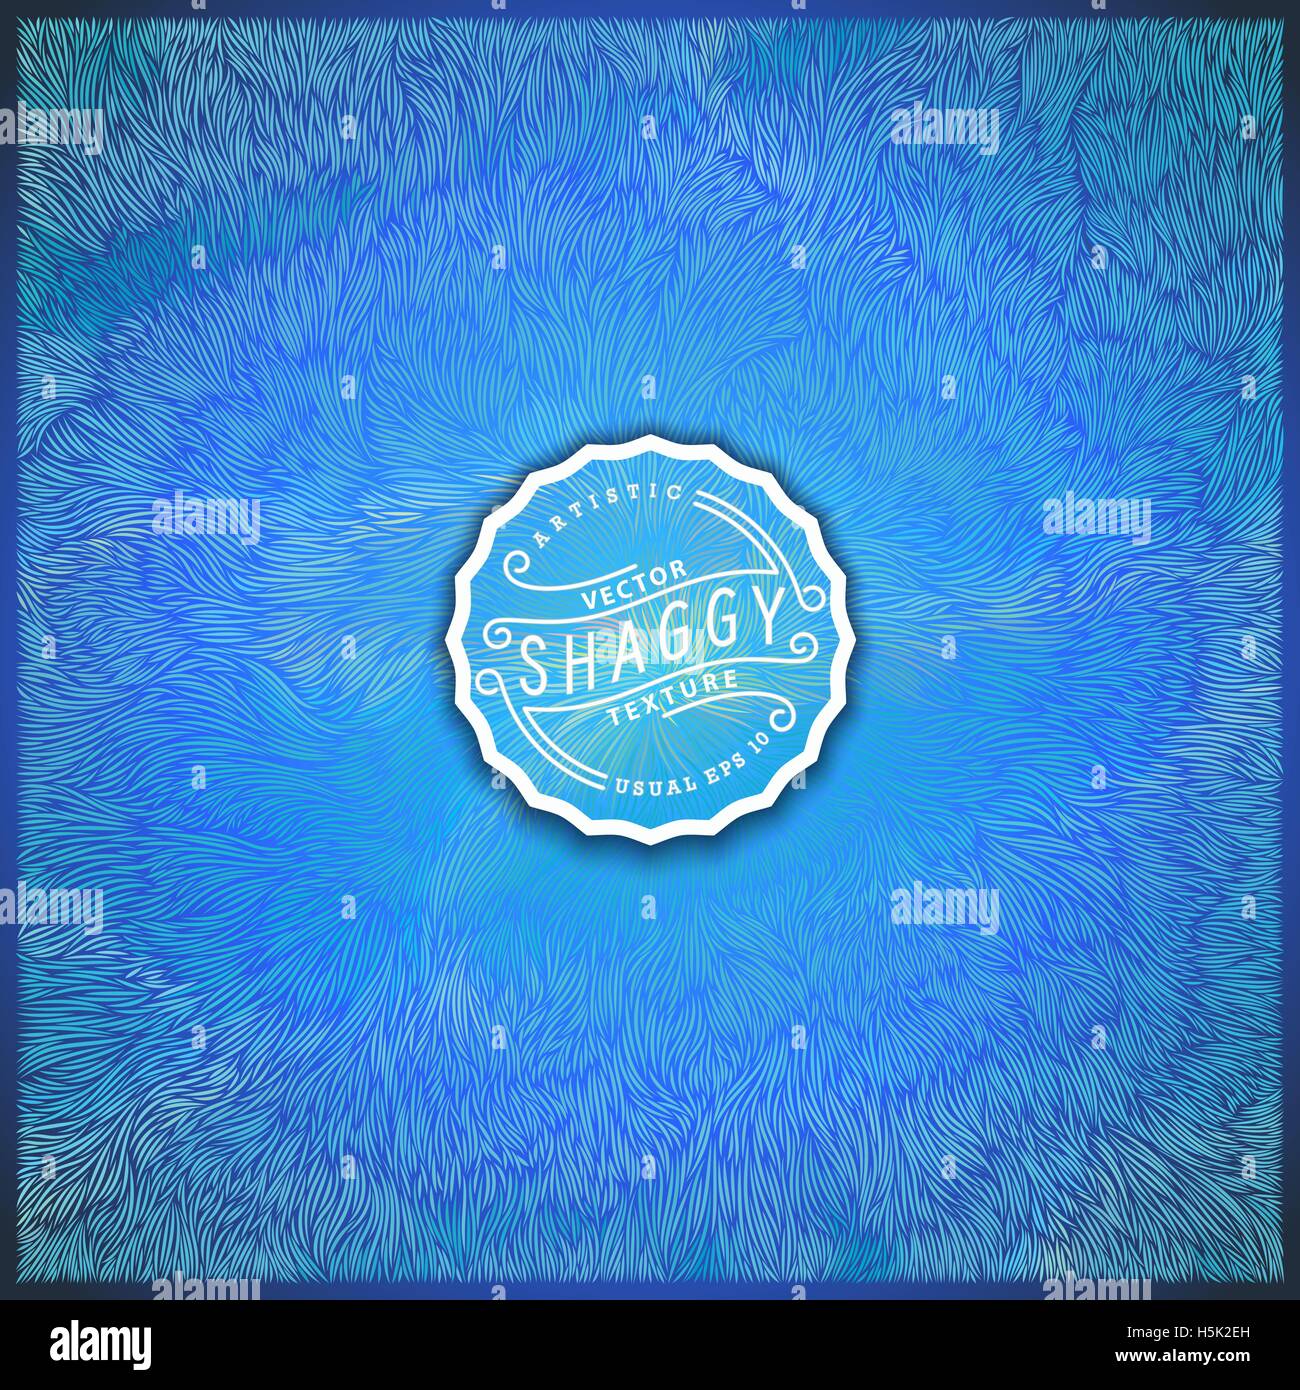 Artistic background Stock Vector